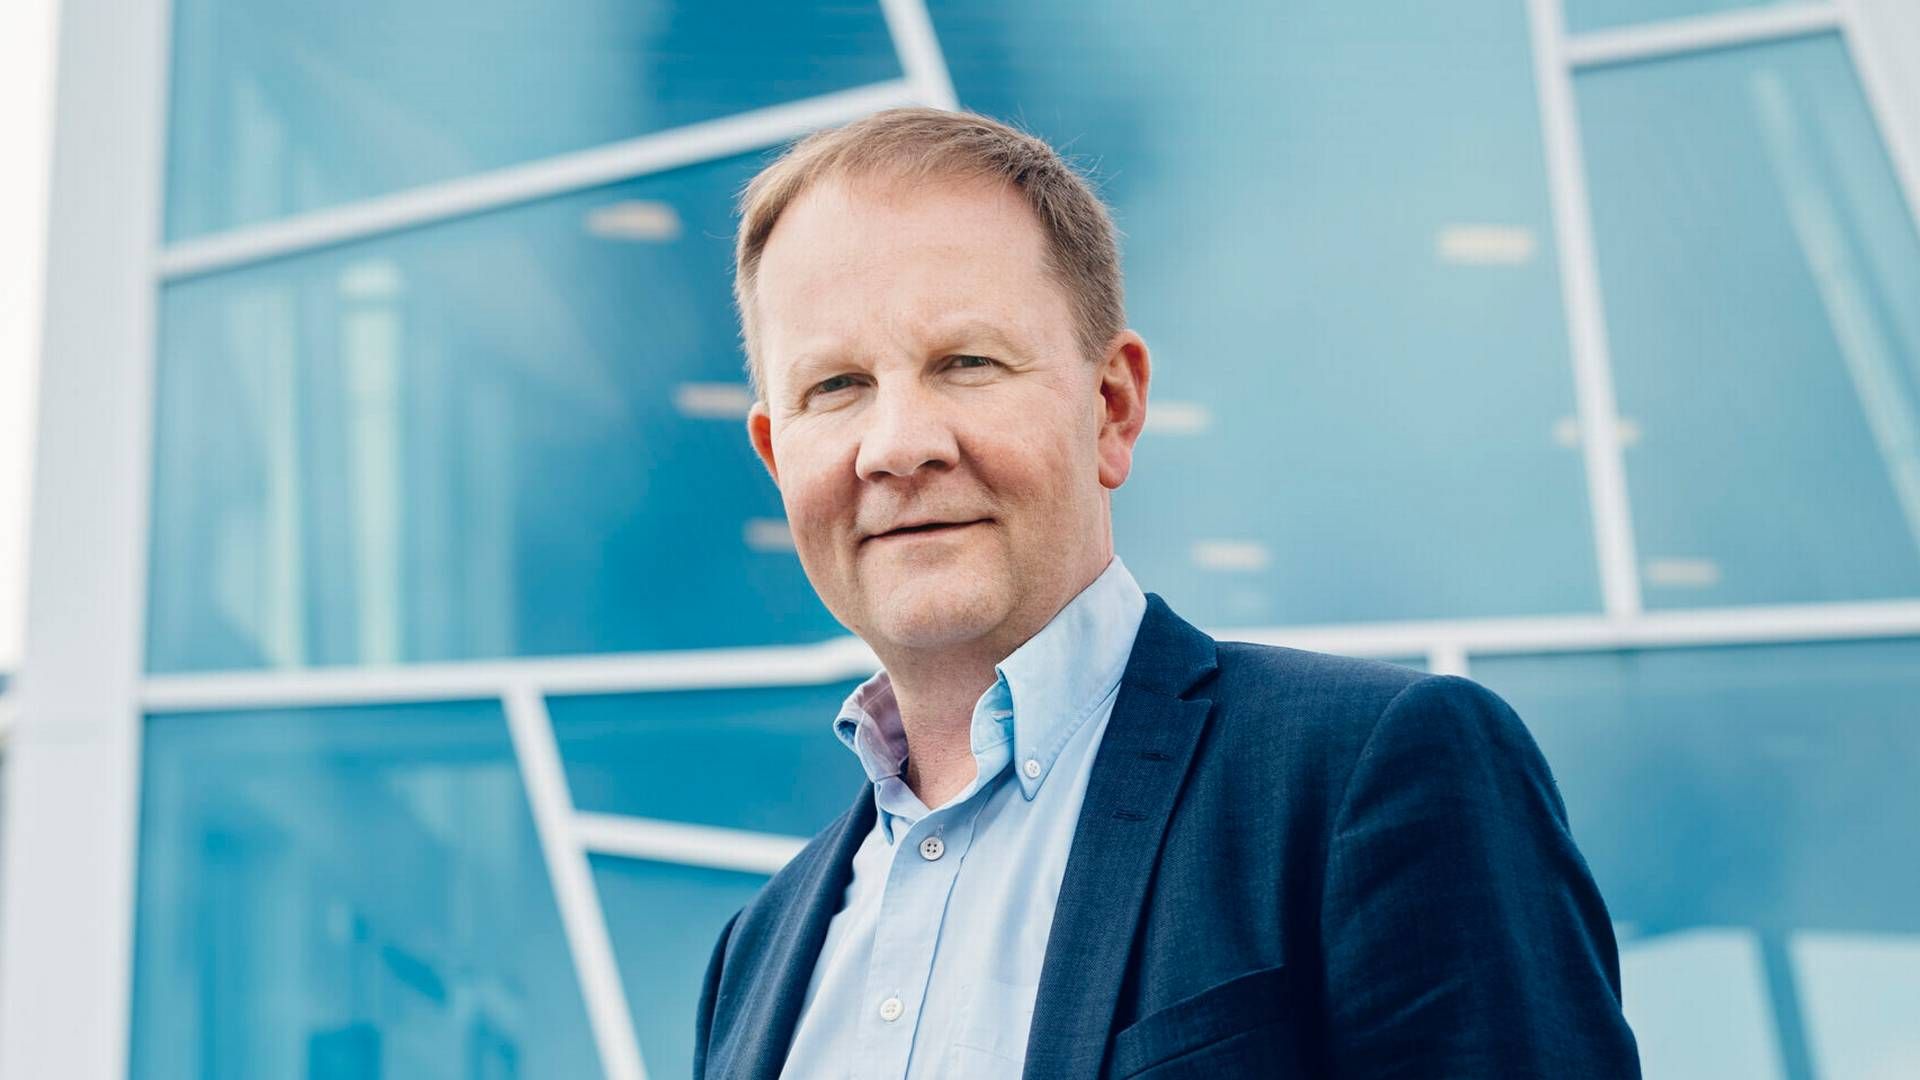 Solstad Offshore has landed a restructuring plan that Christen Sveaas' company Kistefos is not happy about. He demands an extraordinary general meeting. | Photo: Solstad Offshore Asa